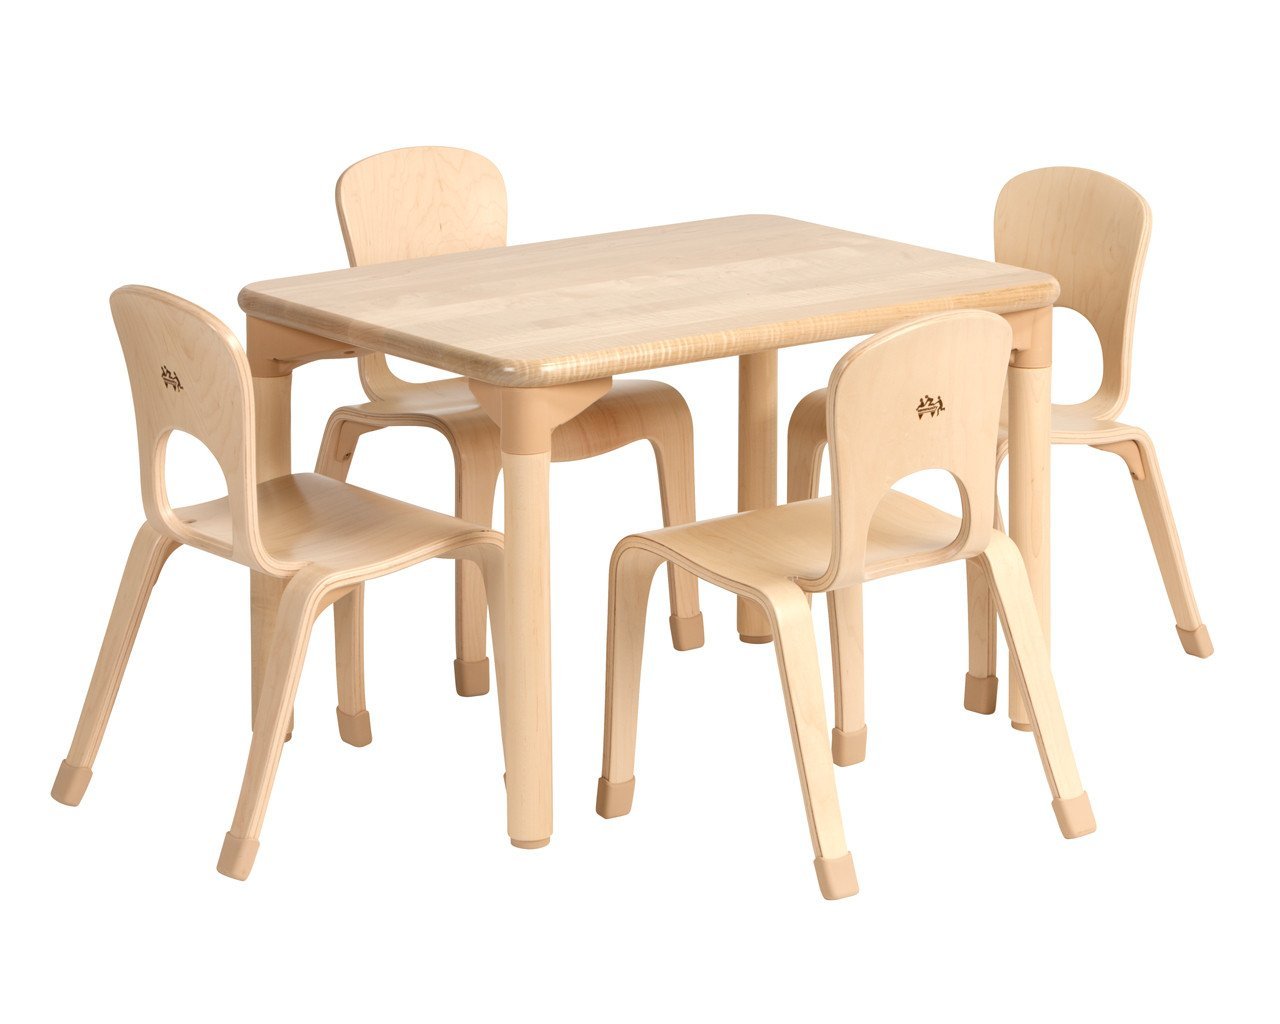 Community Playthings Rectangulr Woodcrest Table 20" and Four Chairs 12" - louisekool